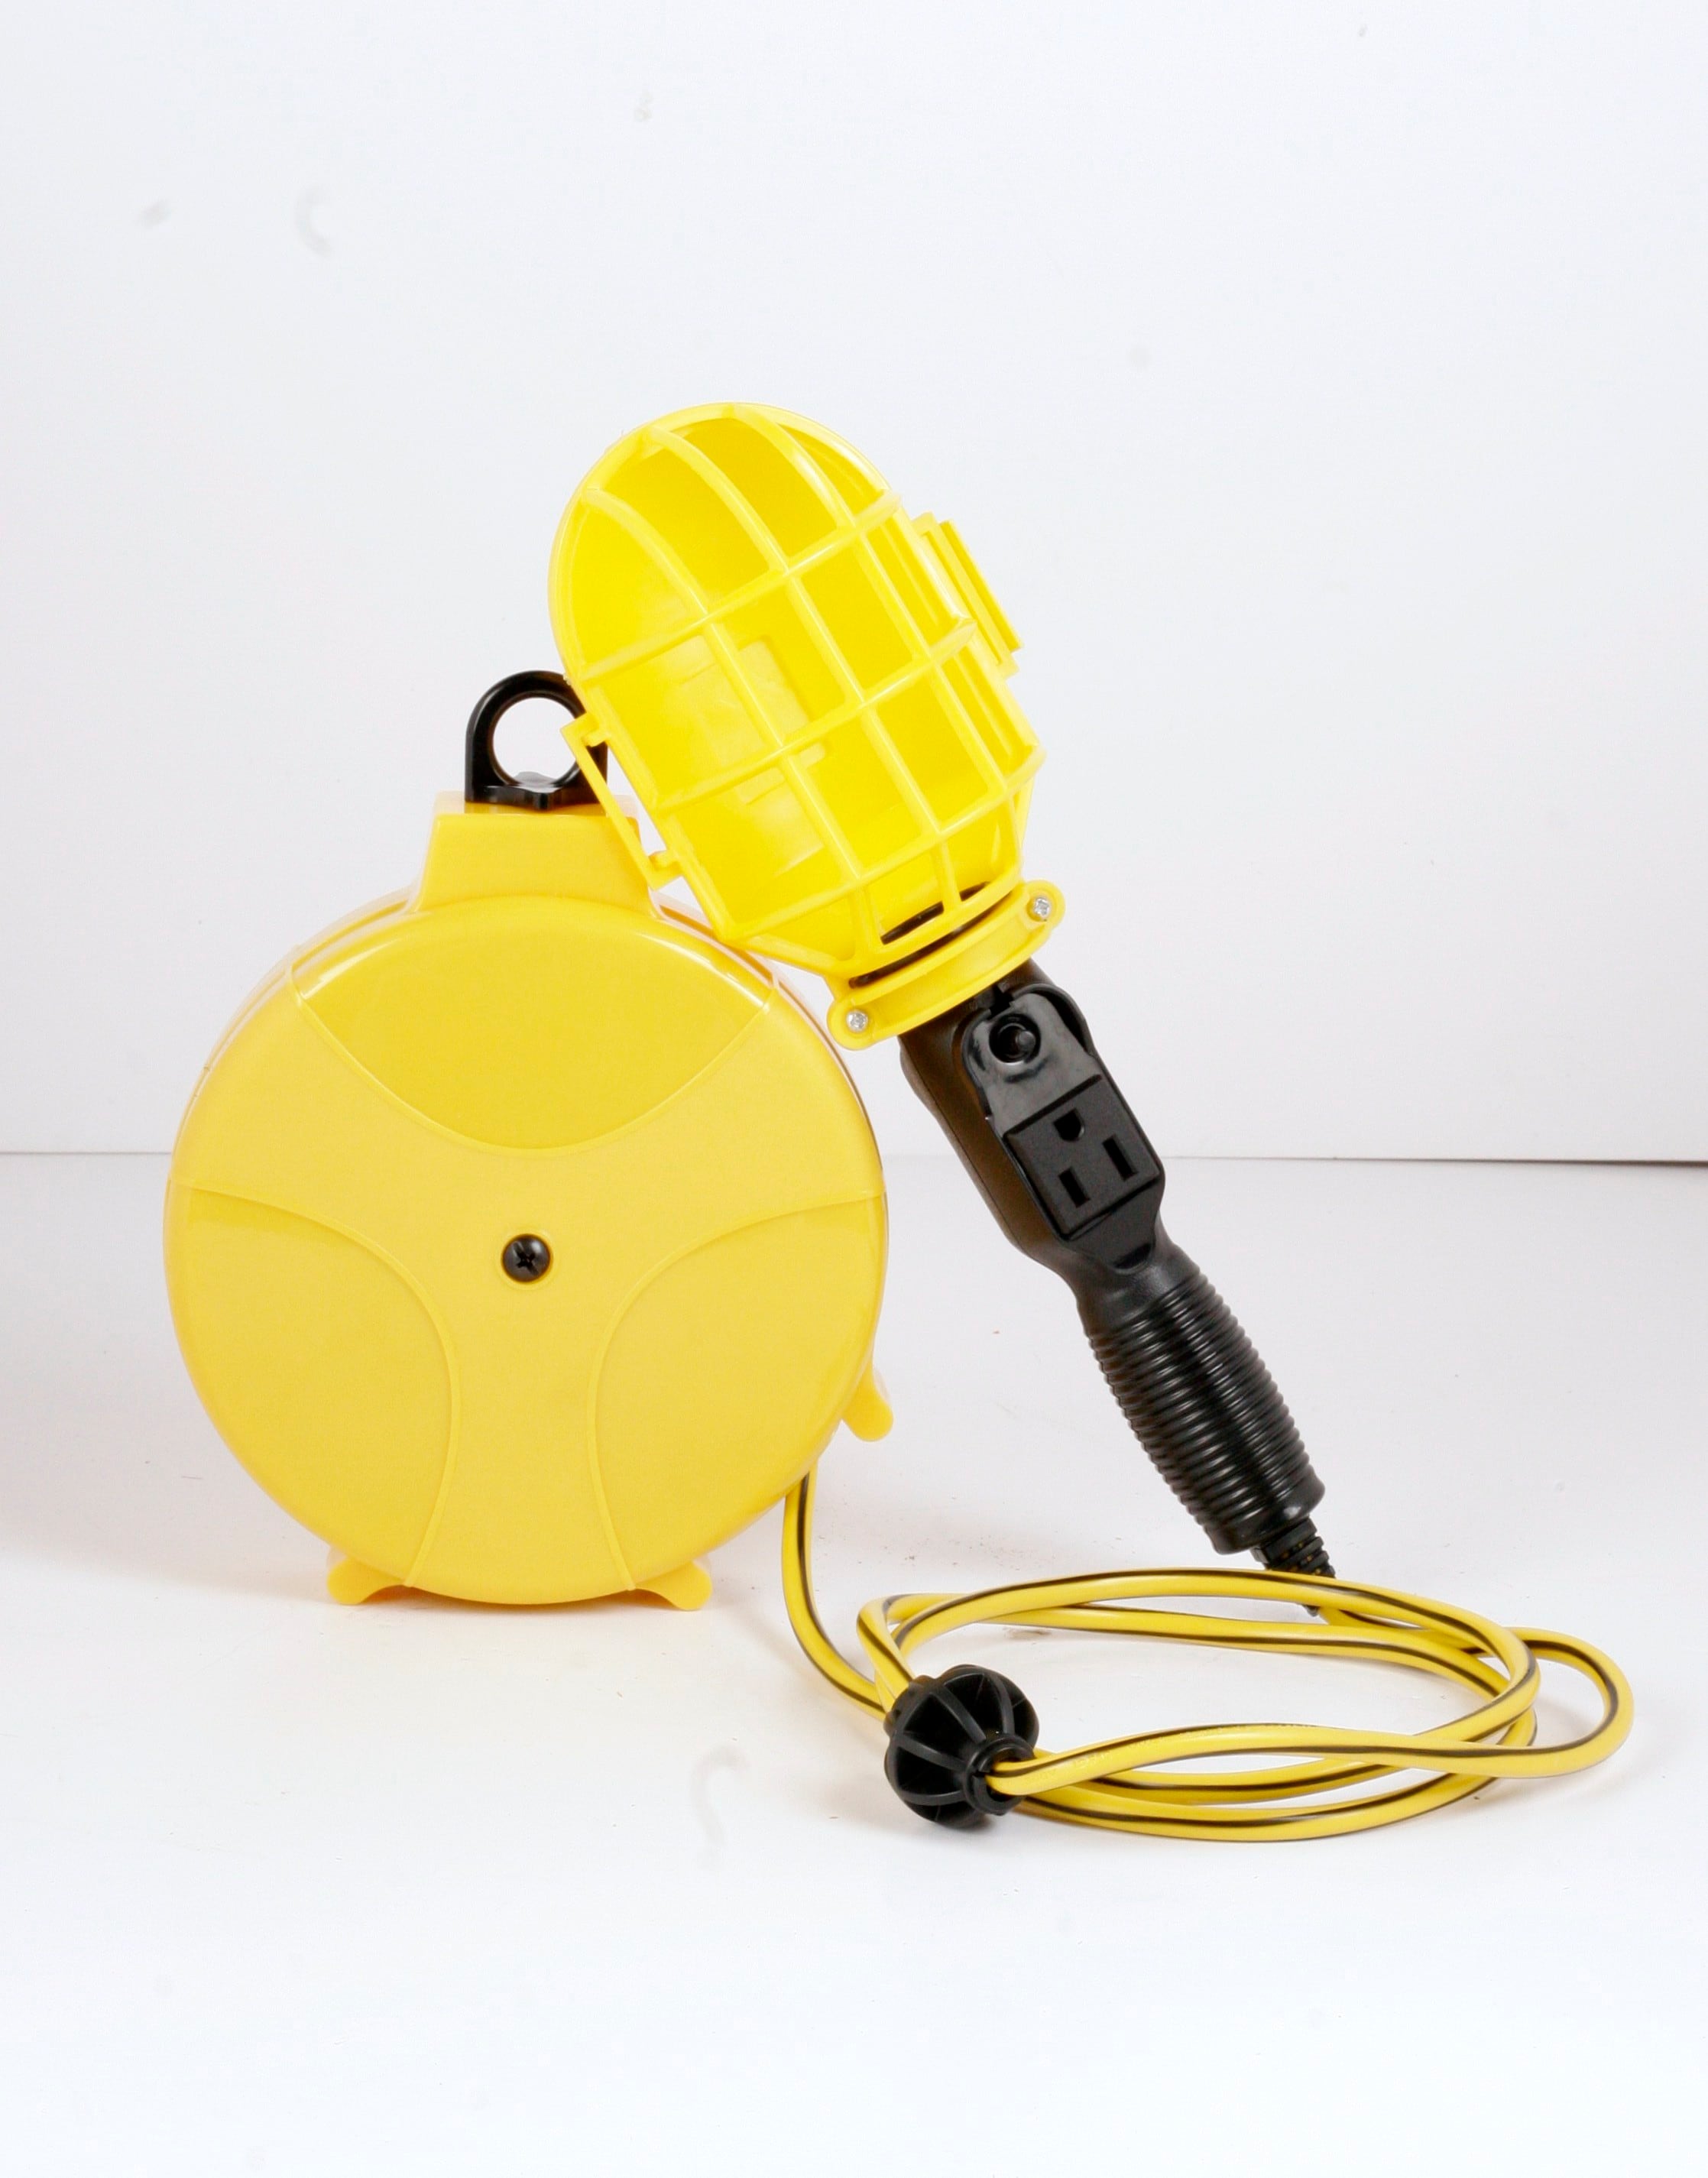 spring loaded small retractable cable reel for home appliances